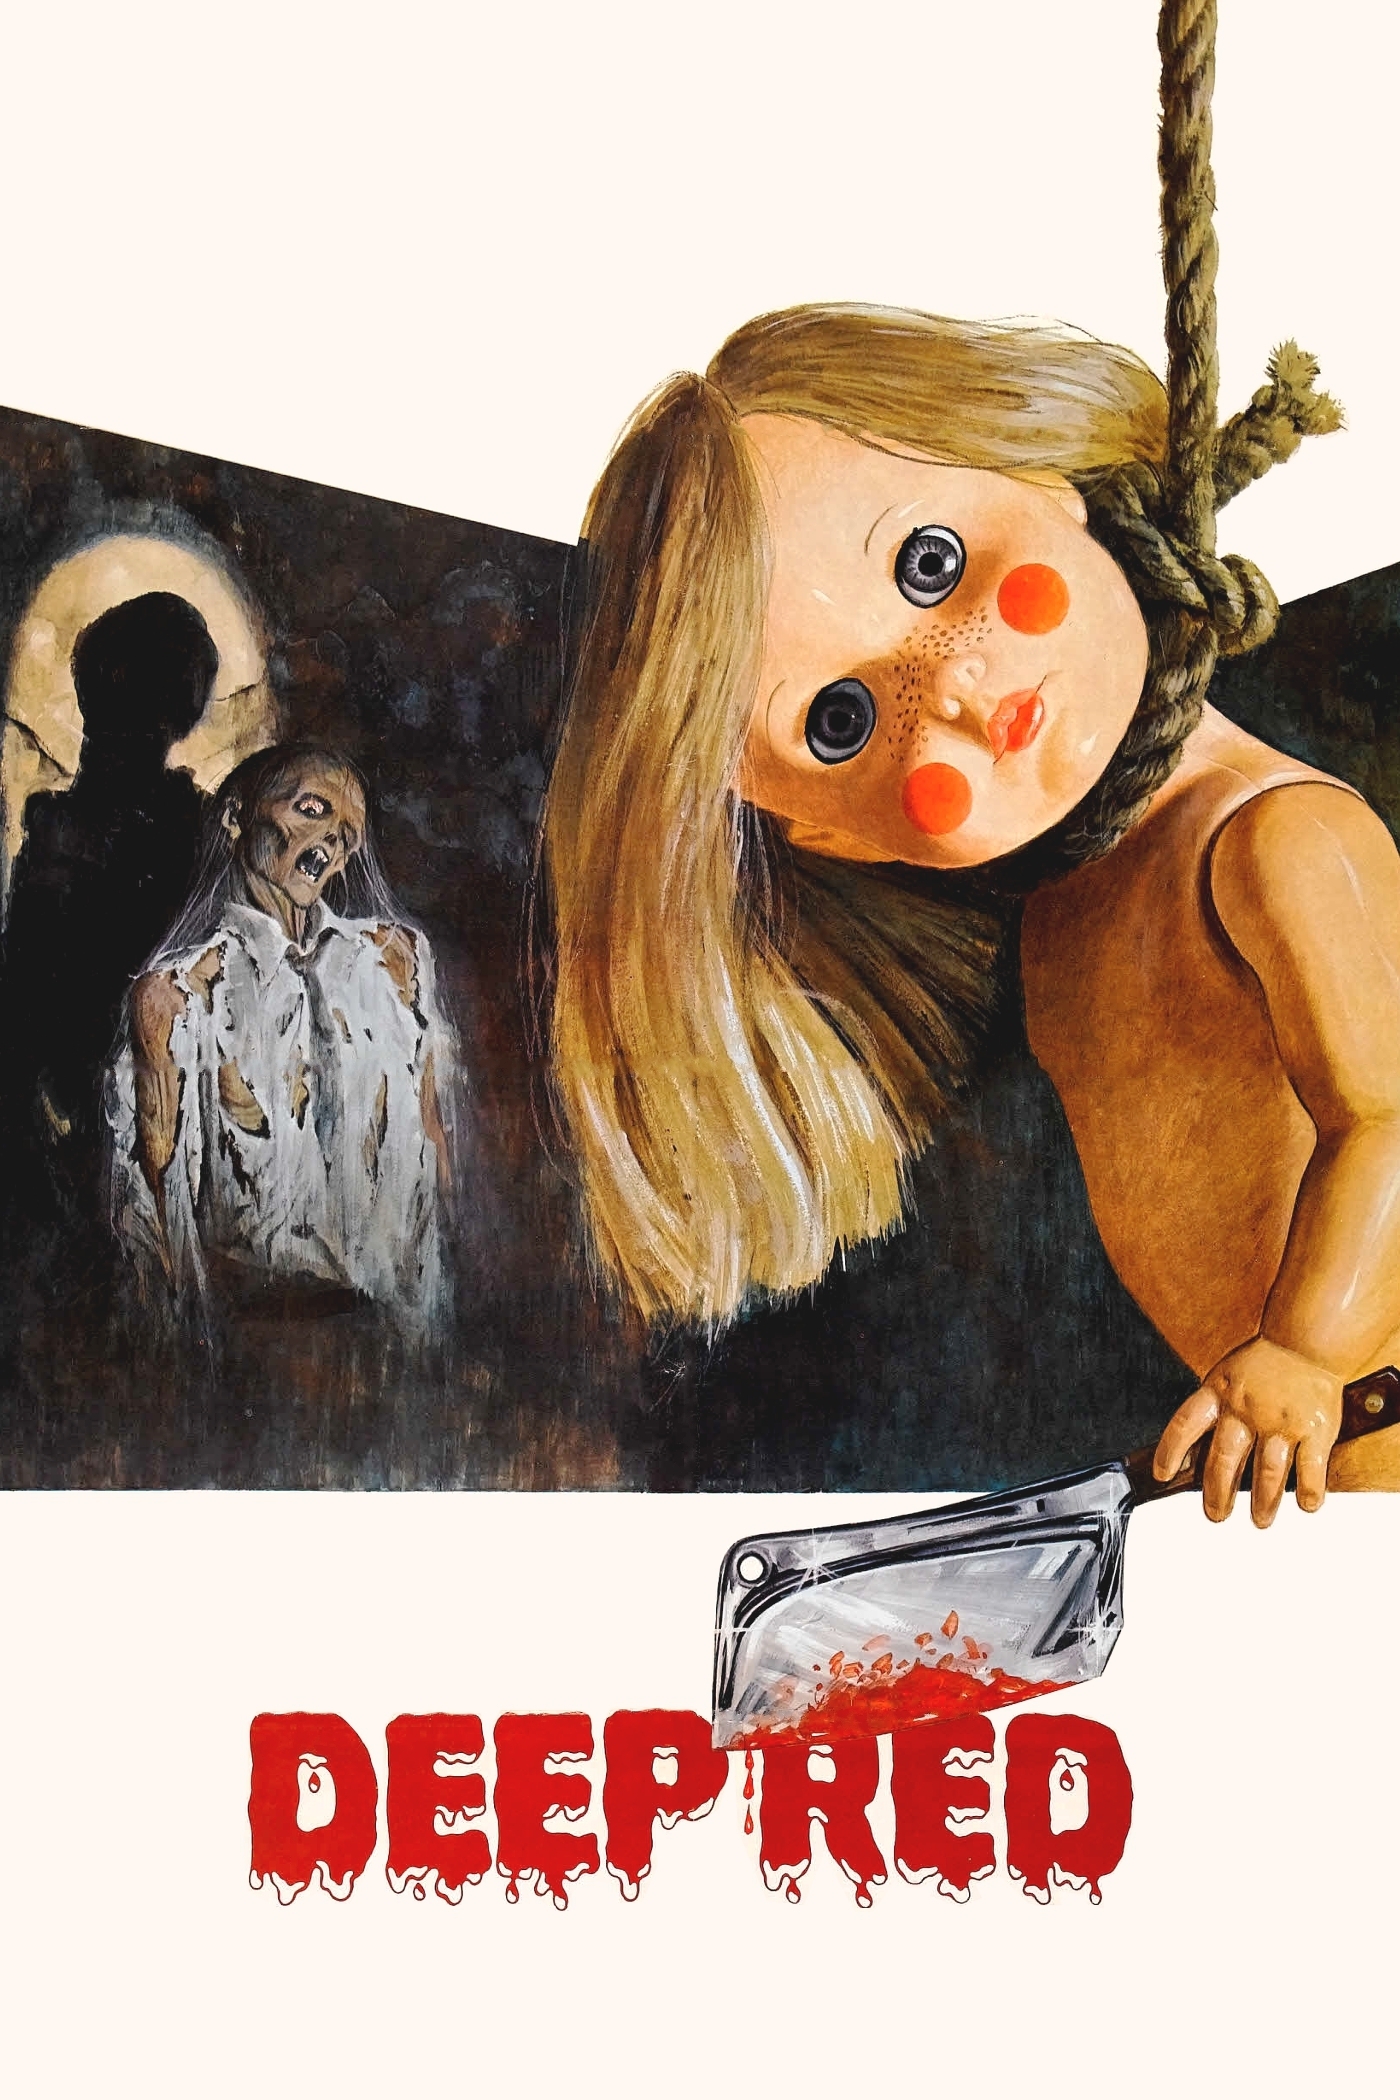 Poster for the movie "Deep Red"